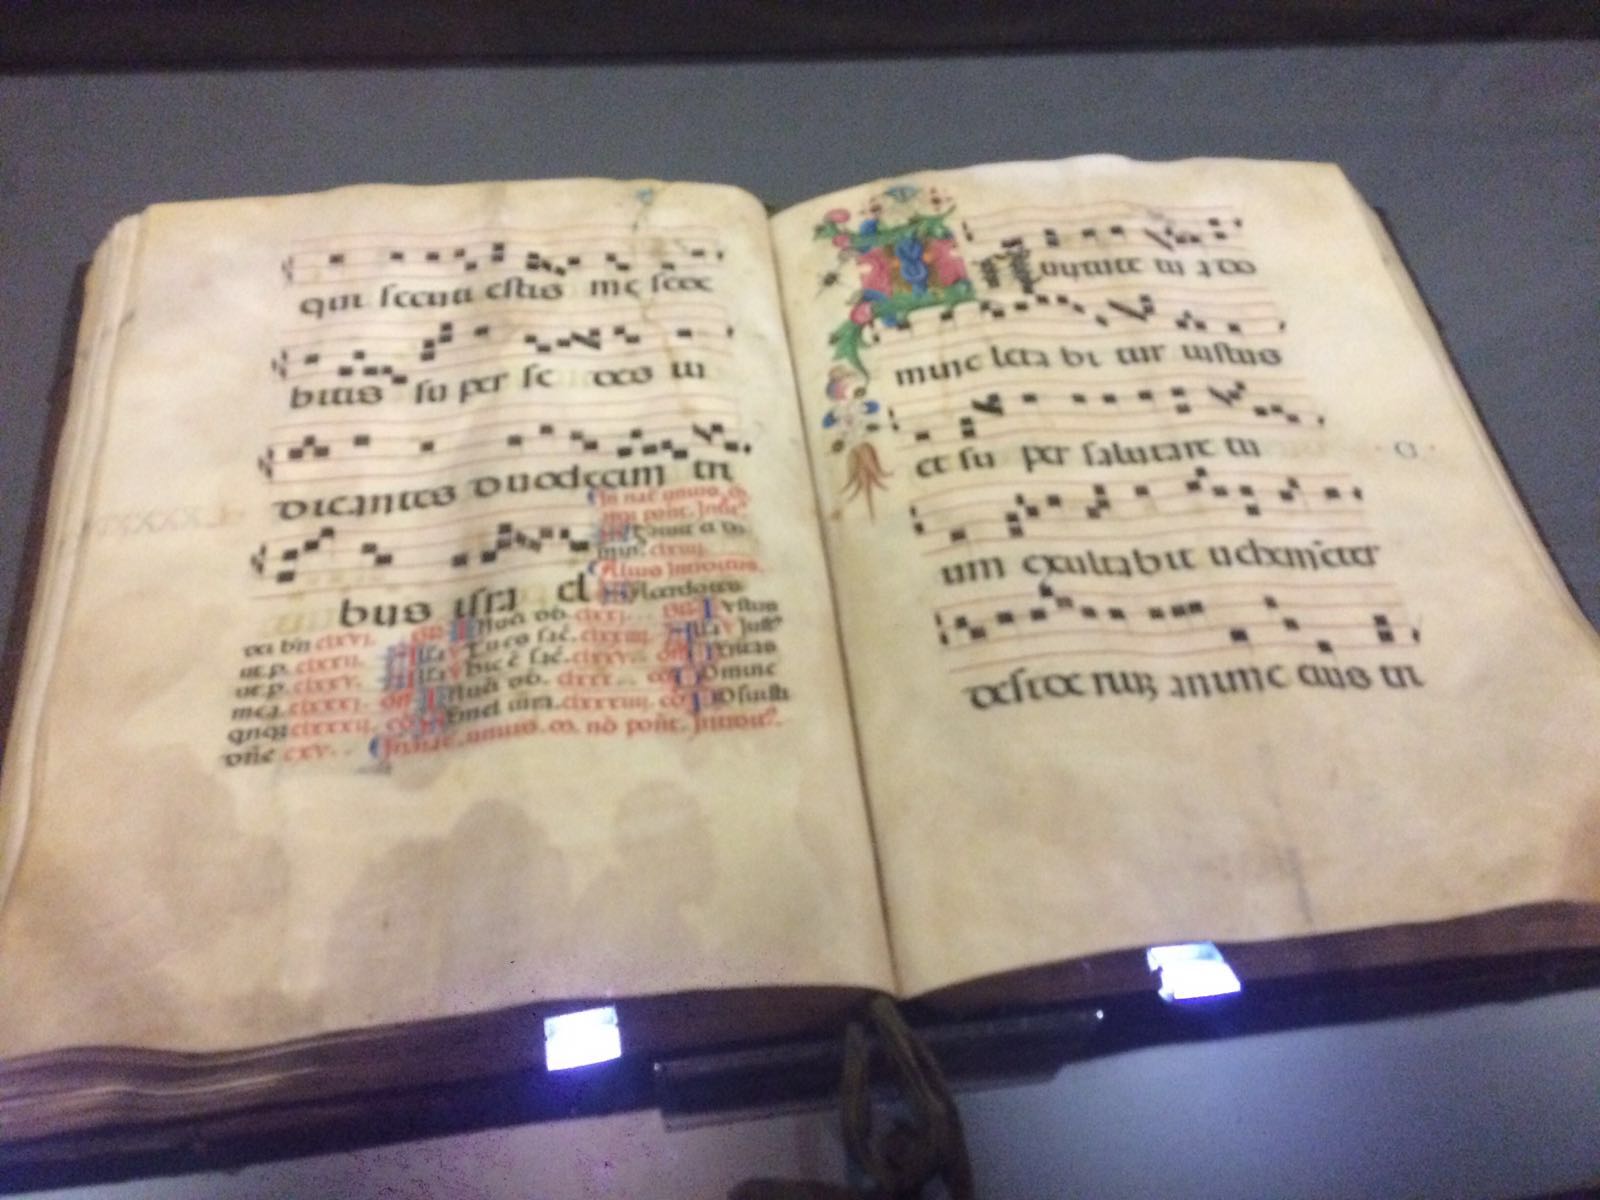 Ancient bible used in conducting mass at the Basilica.